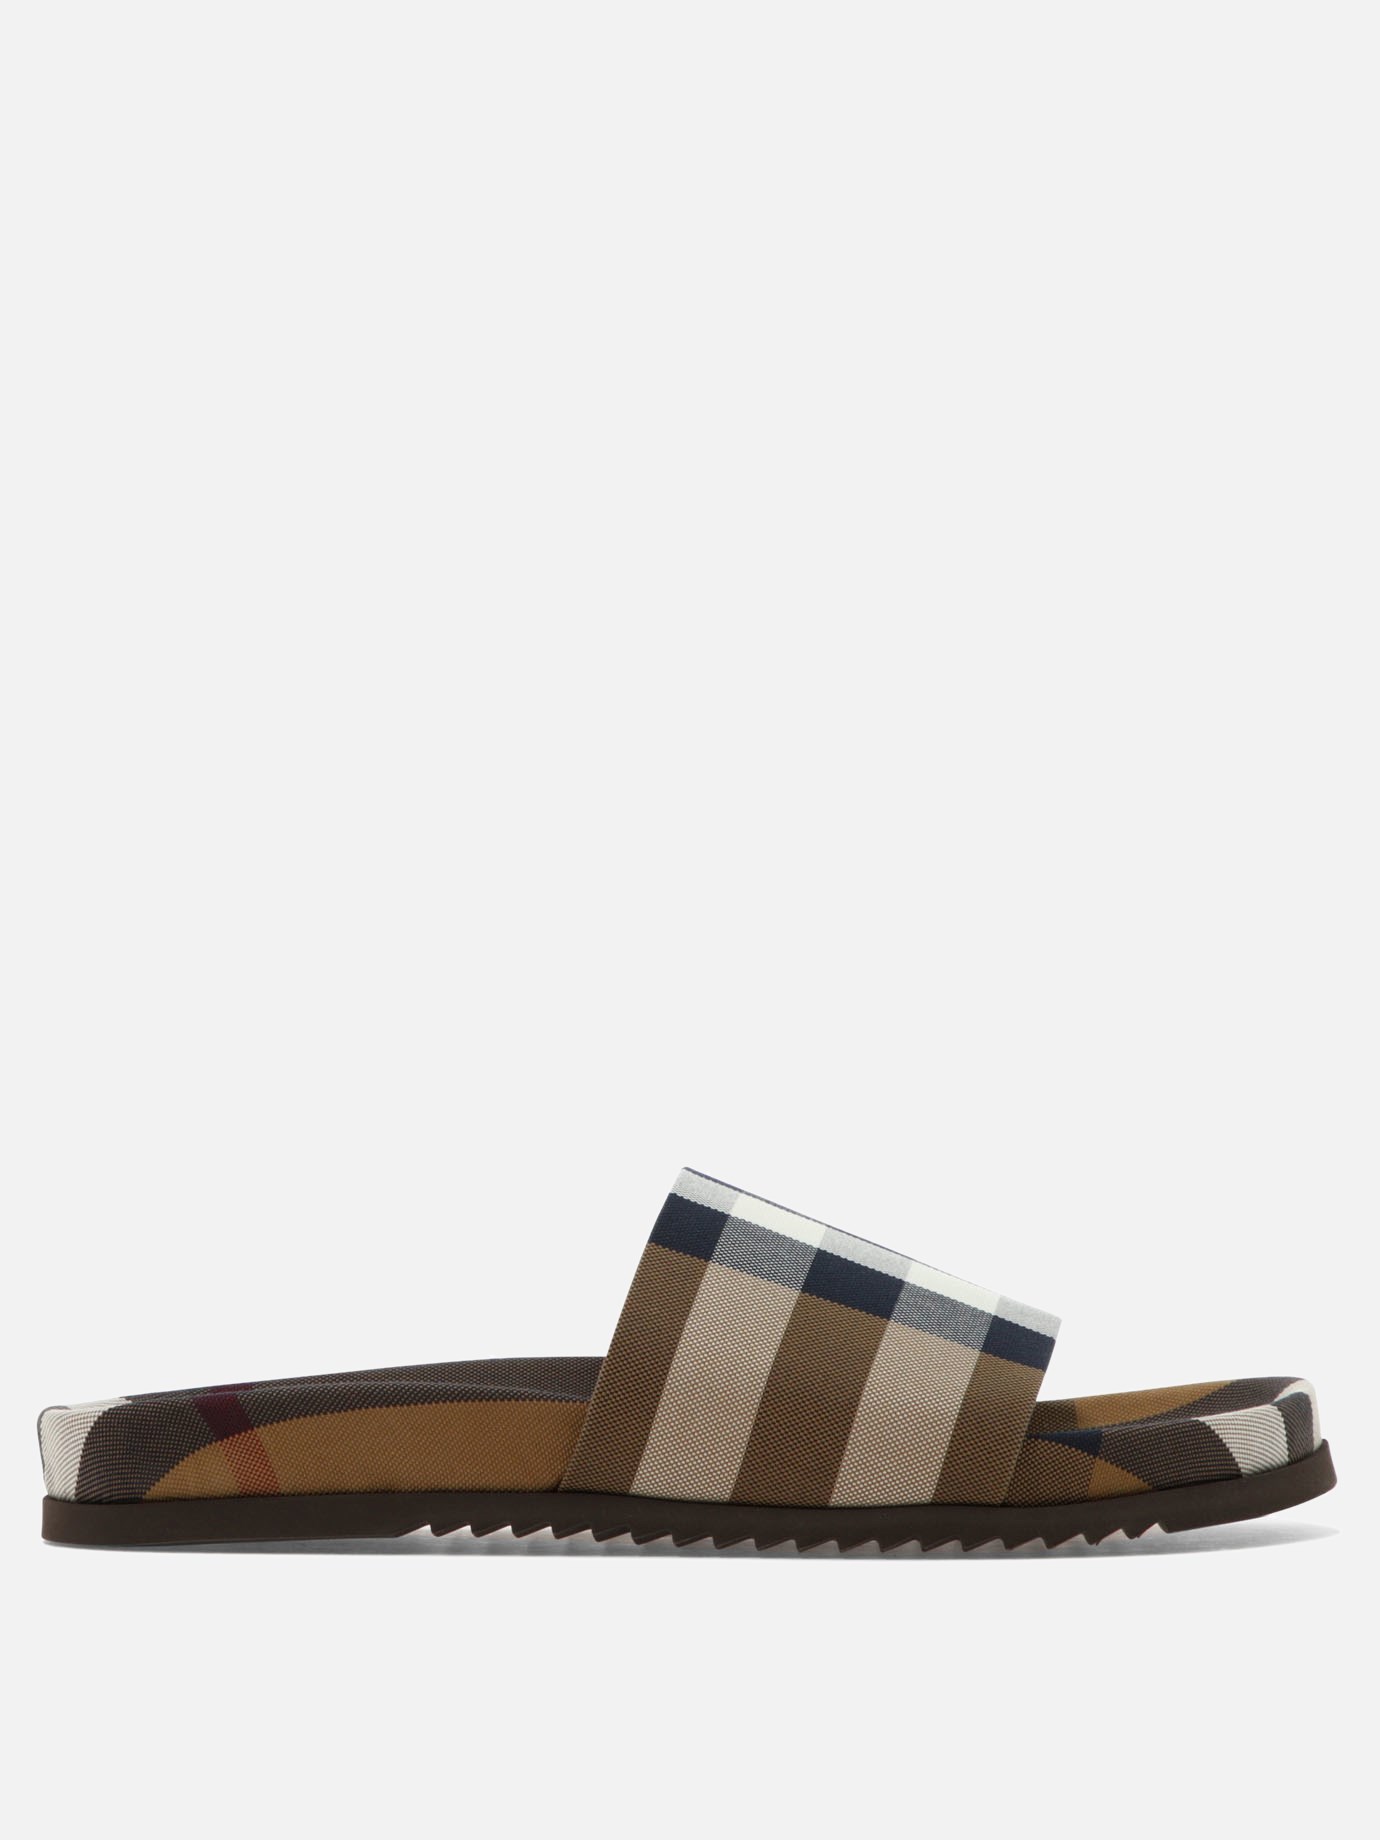  Melroy  sandalsby Burberry - 0